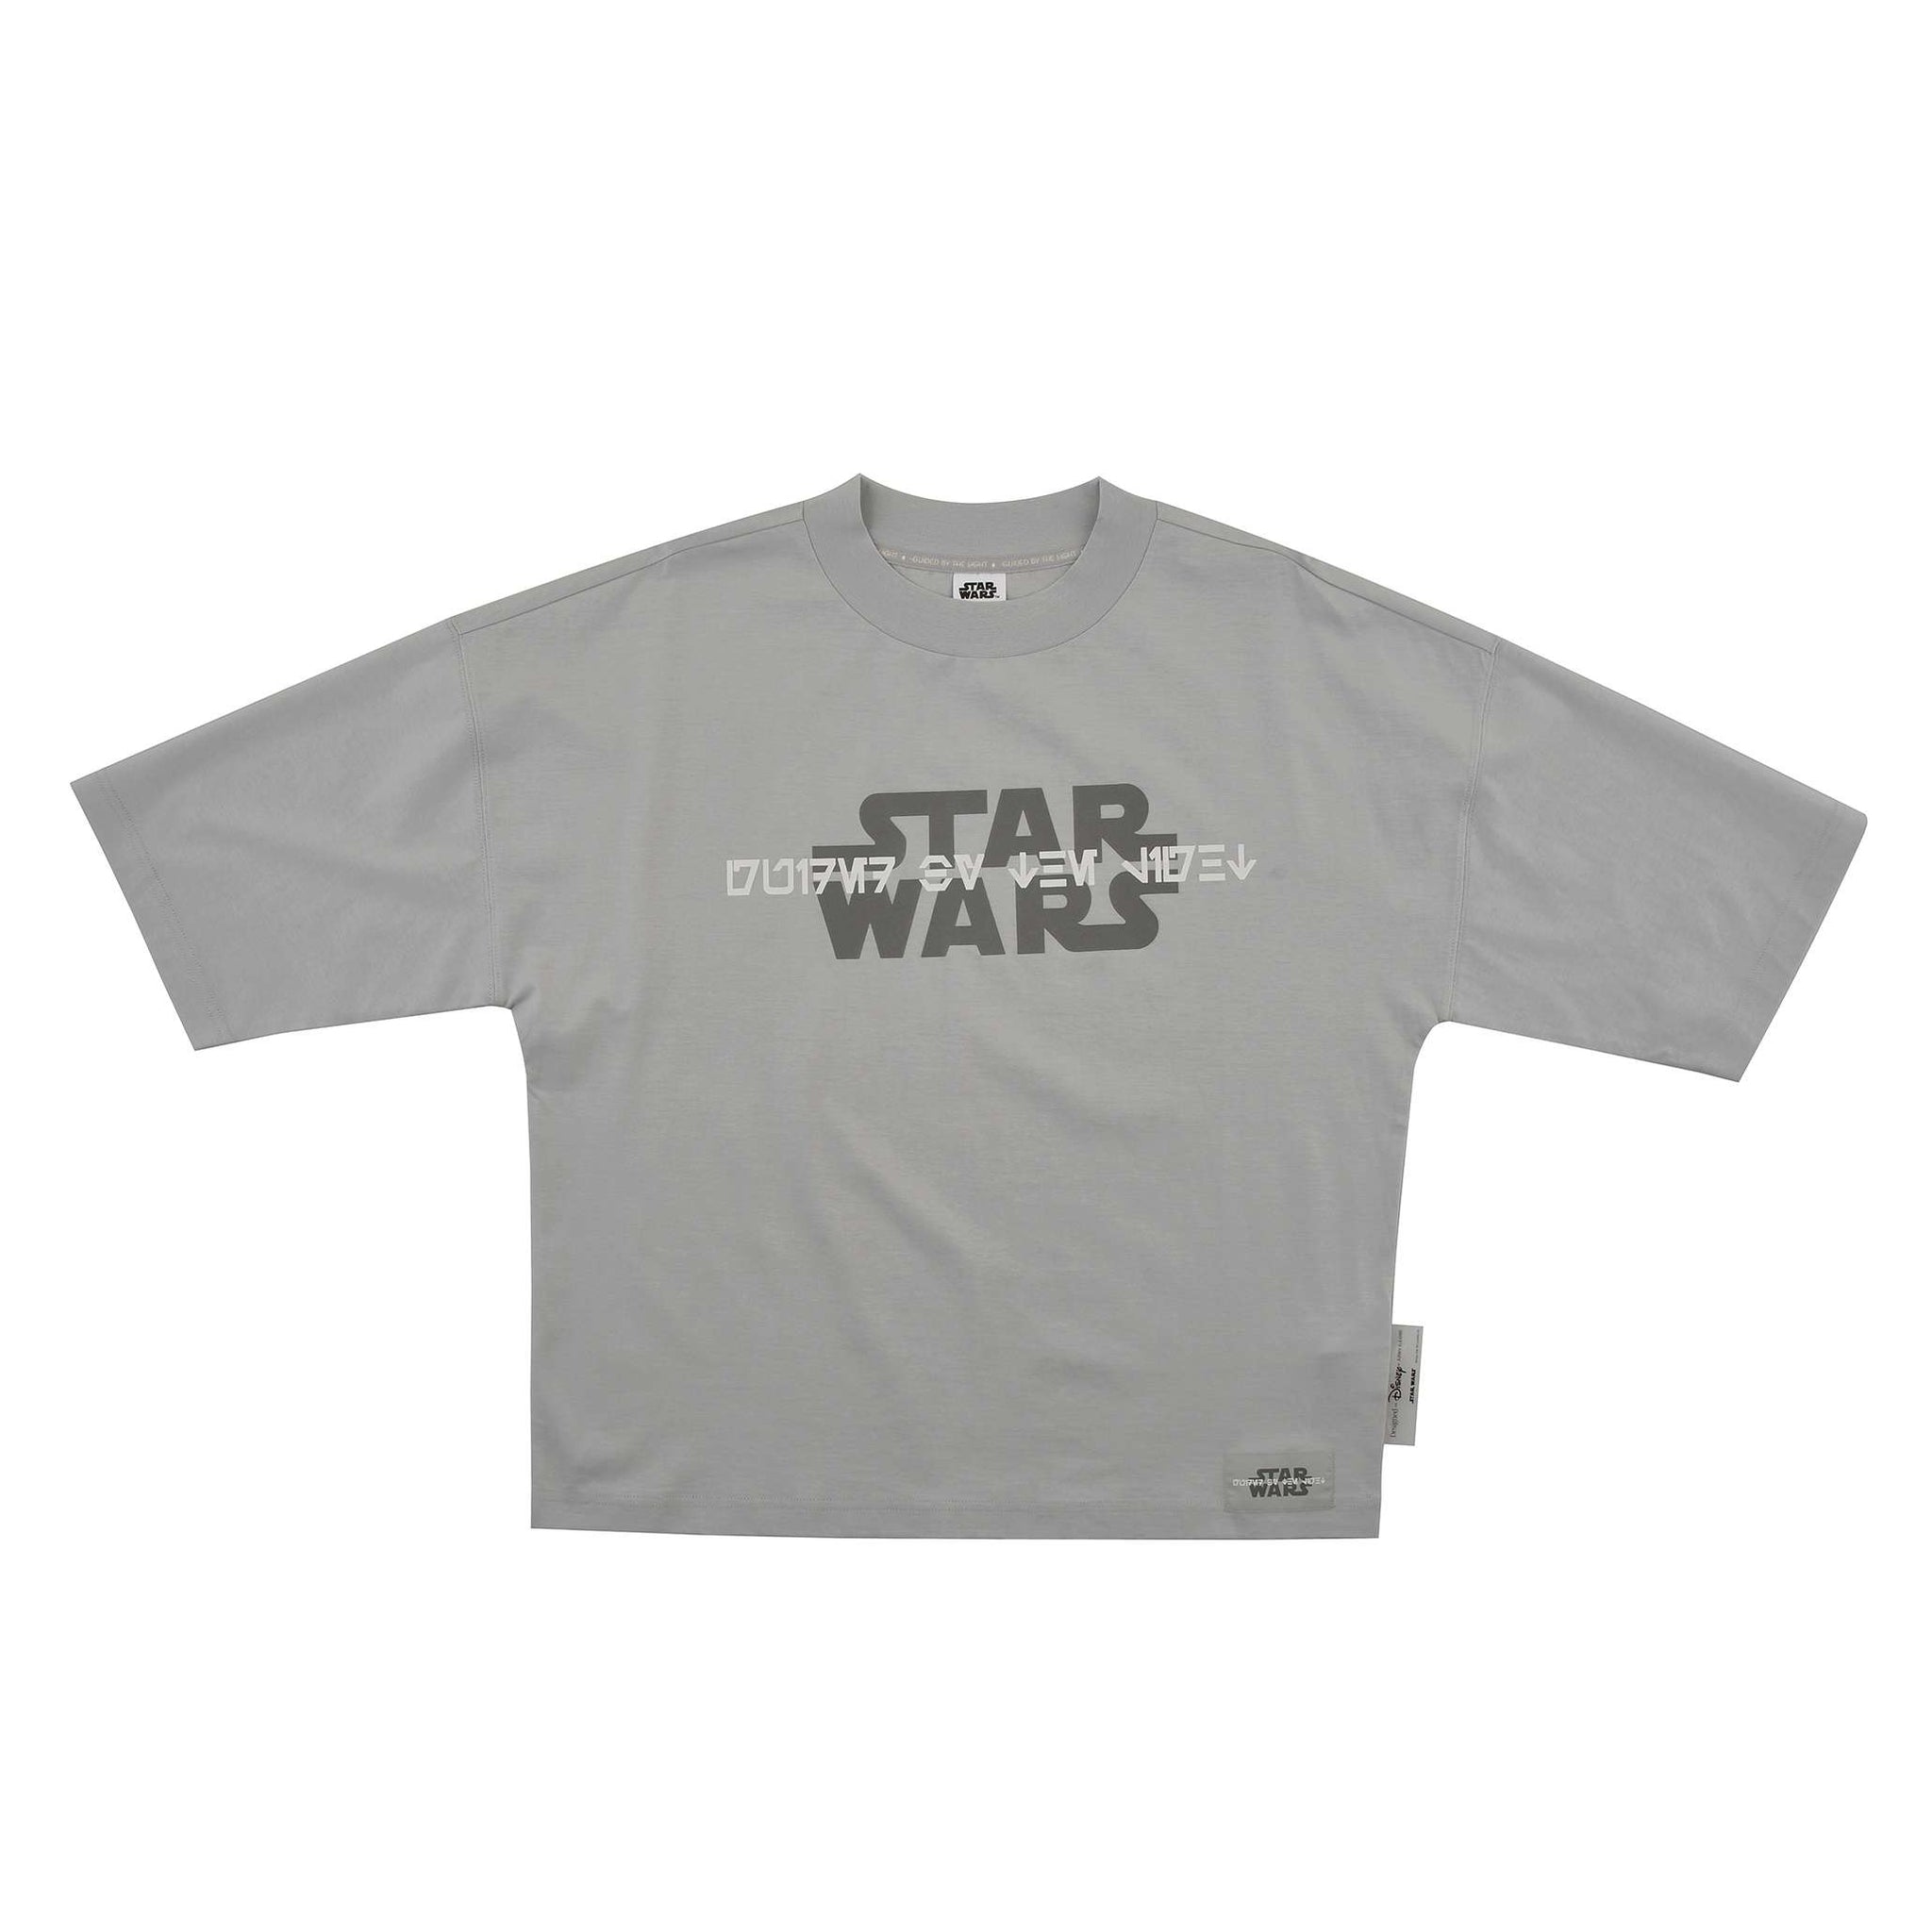 Disney Store Star Wars Guided By The Light Short Sleeve T-Shirt